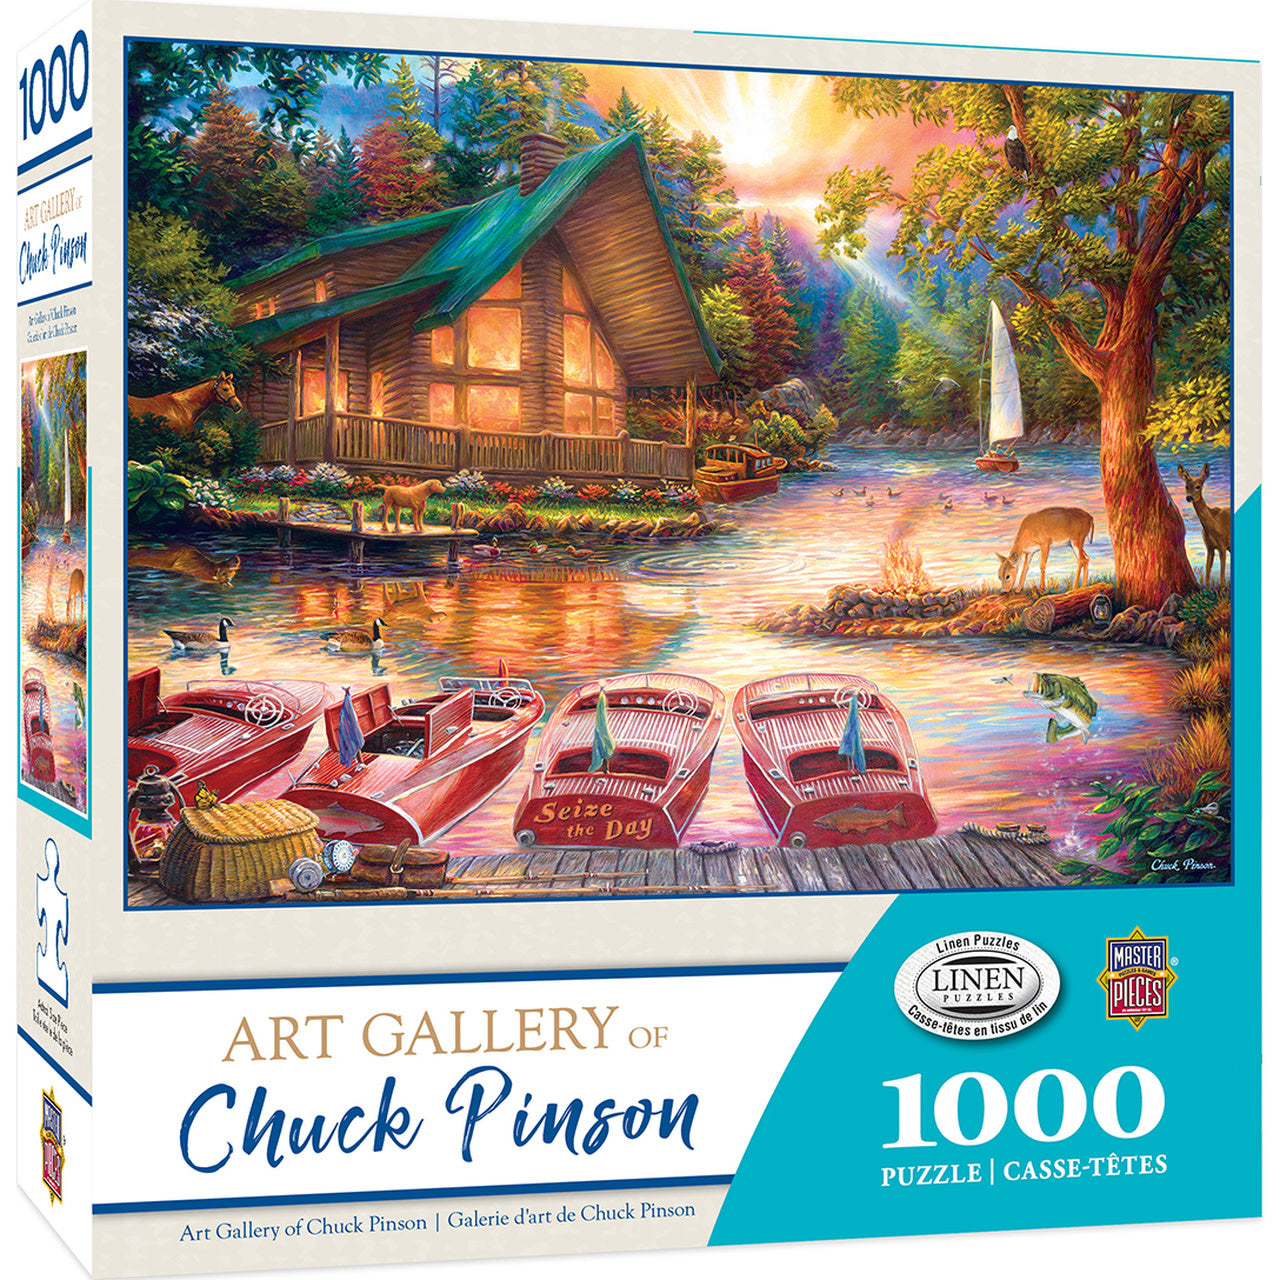 Chuck Pinson Gallery - Seize the Day  brand new puzzle featuring a lakeside cabin at sunset by artist Chuck Pinson. Measures 19.25" x 26.75".